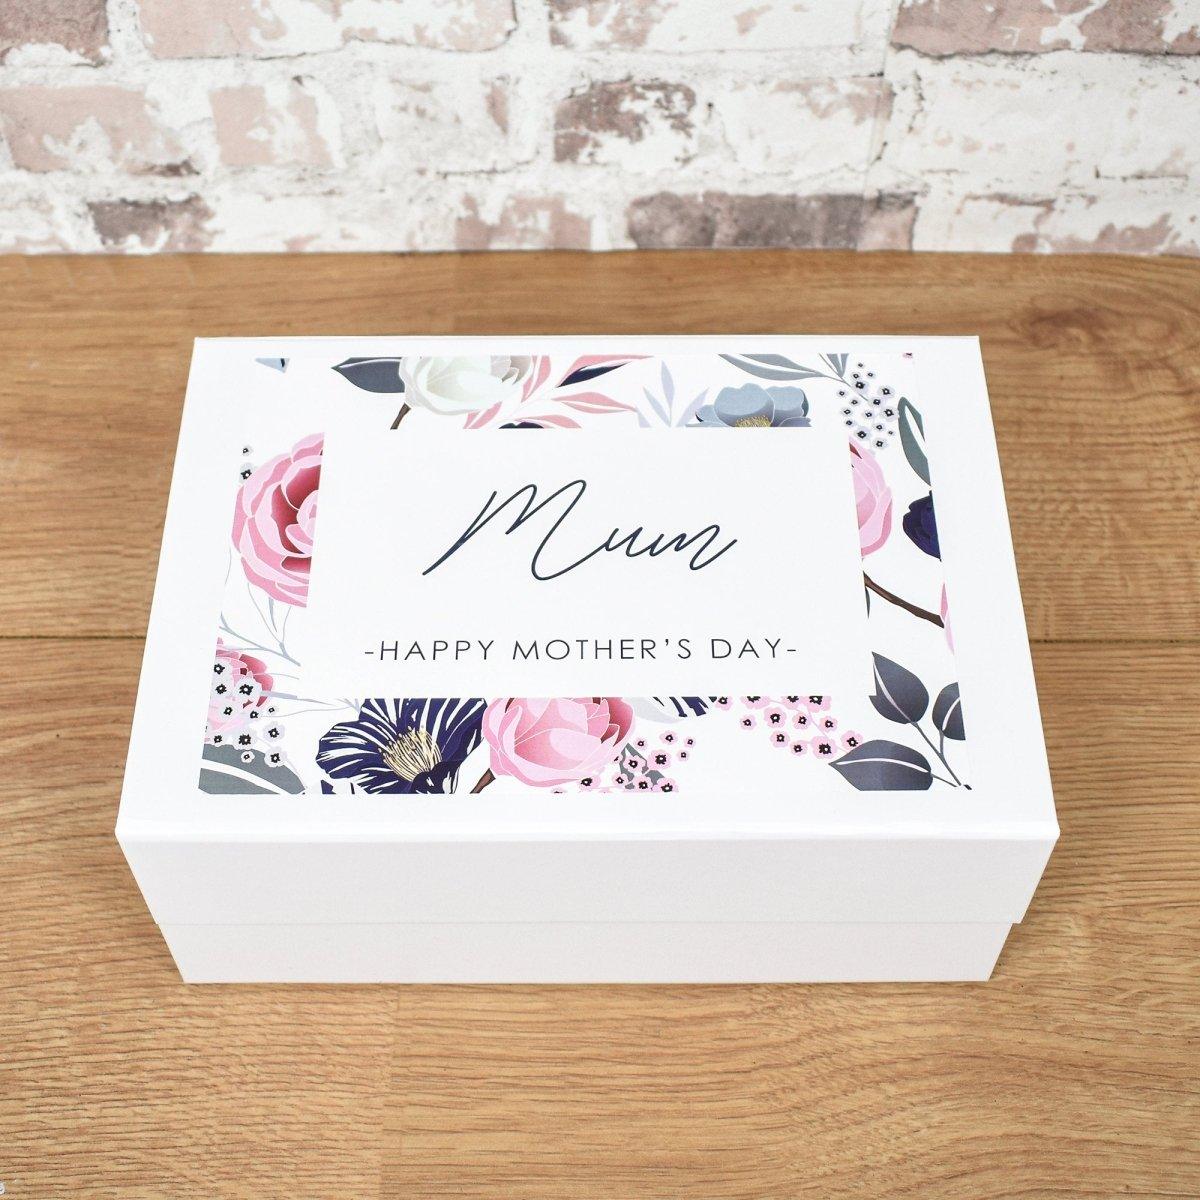 Personalised Mothers Day Gift Box, Mothers Day Gift Set, Gift for Mum, Nan Gift, Mothers Day Hamper, Mum Gift Box, Nana Mothers Day Gift - Amy Lucy